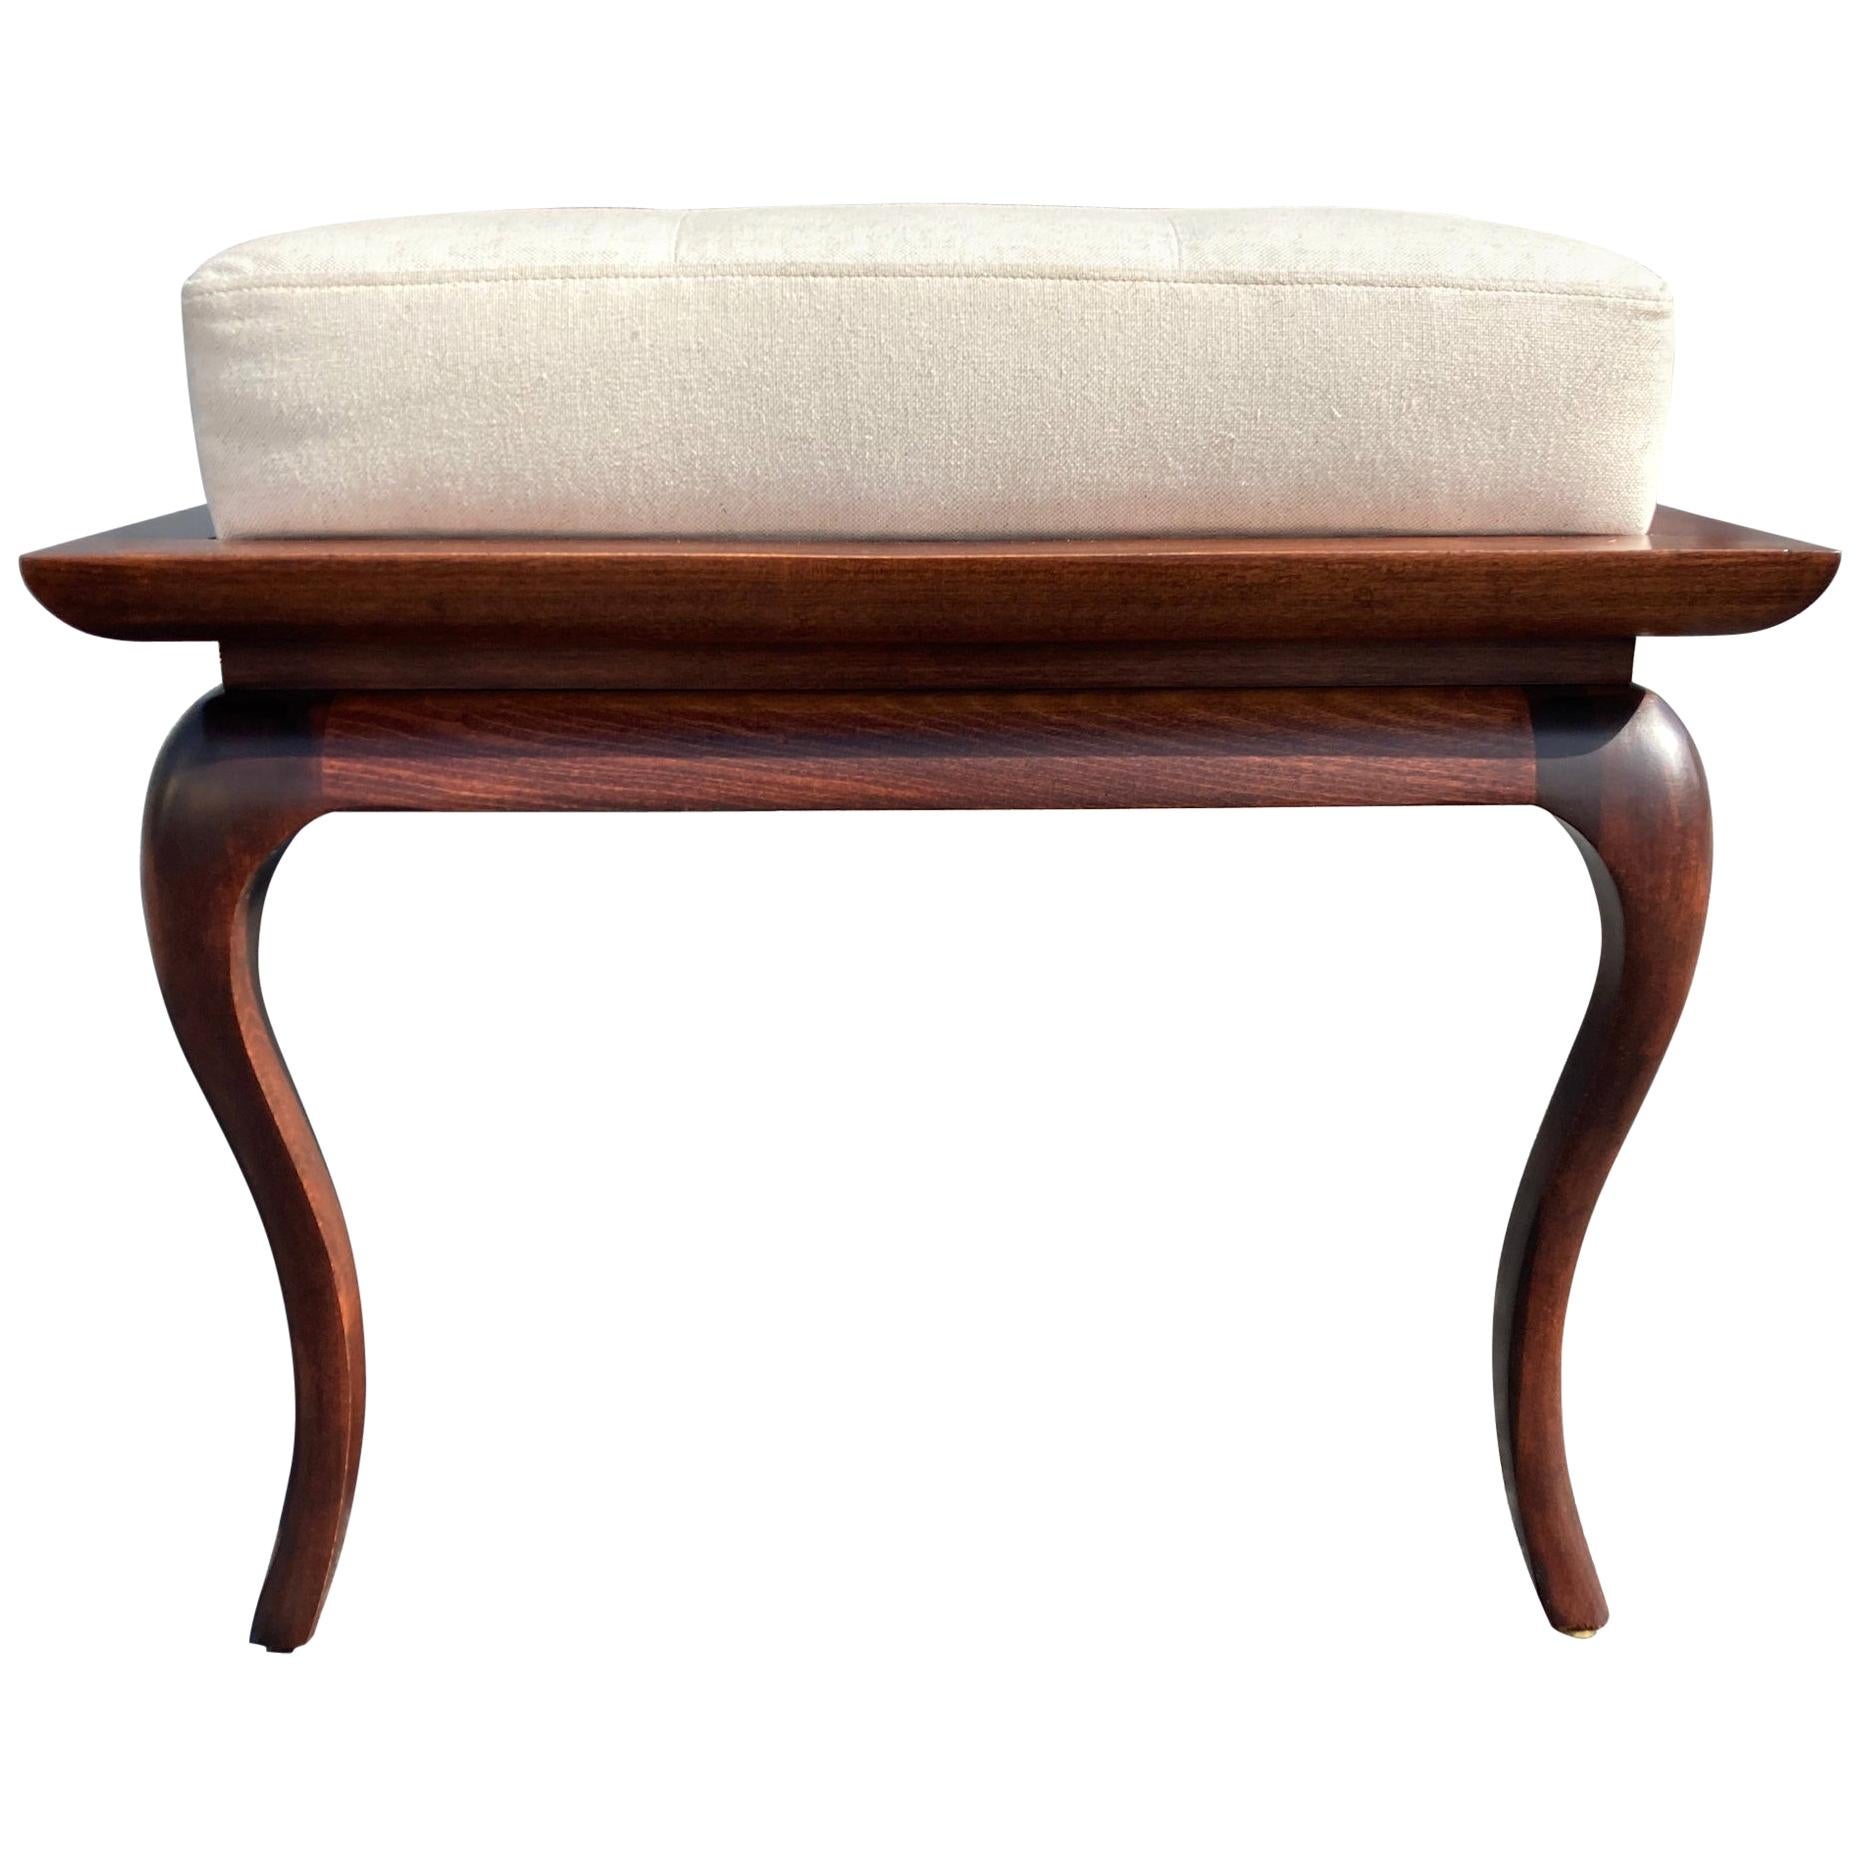 Spectacular Bench, Saber Leg, Fabric, Brown, in the style of Gibbings, 1950s